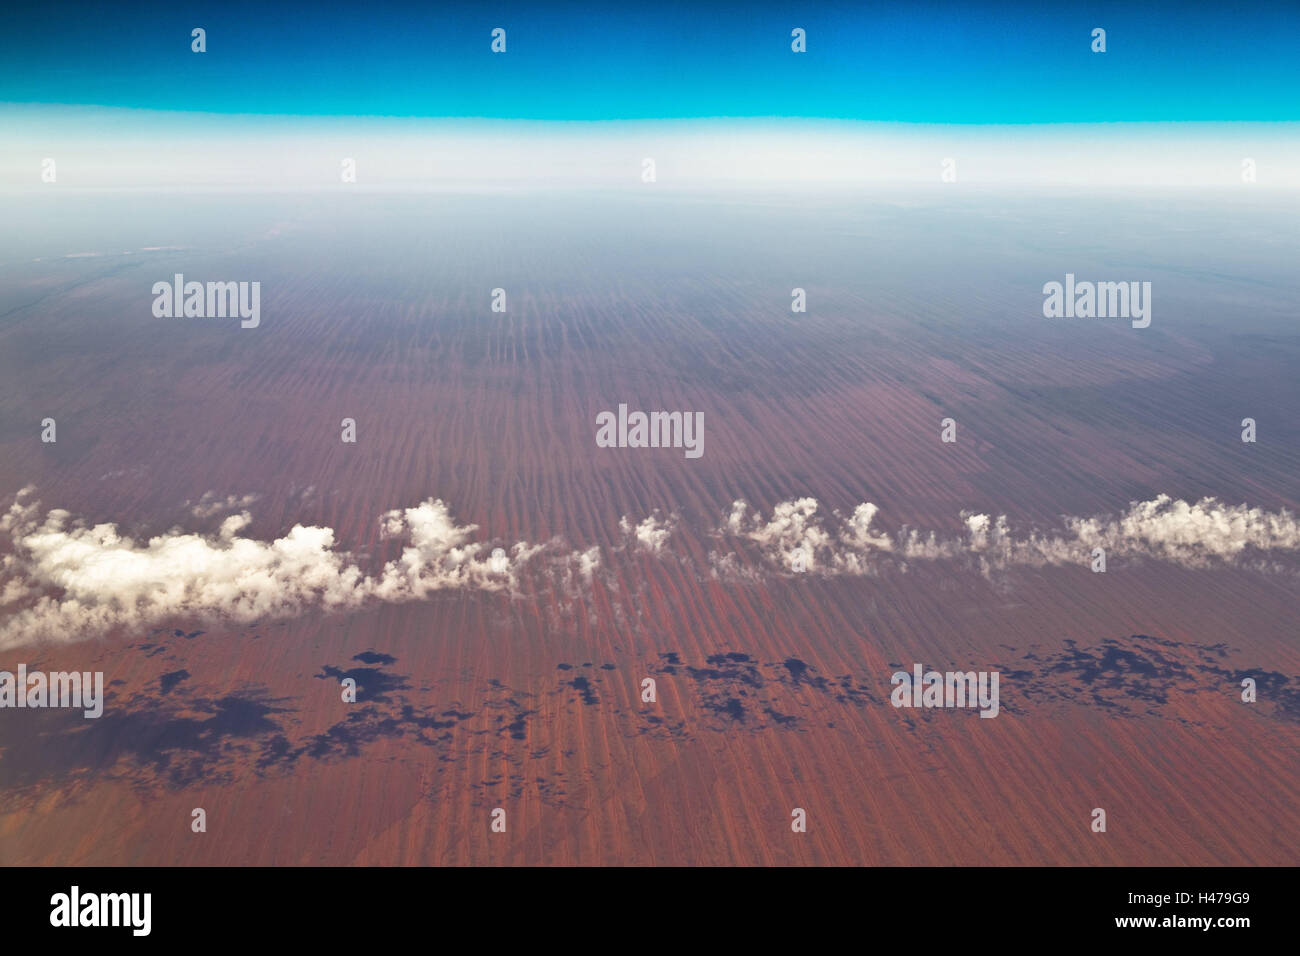 Australia, to Northern Territory, scenery, aerial shots, loneliness, extreme scenery, flight, geology, horizon, scanty country, scenery panorama, vacuousness, aerial picture, panorama, travel, Sandy, structure, dry scenery, infinity, width, clouds, desert Stock Photo